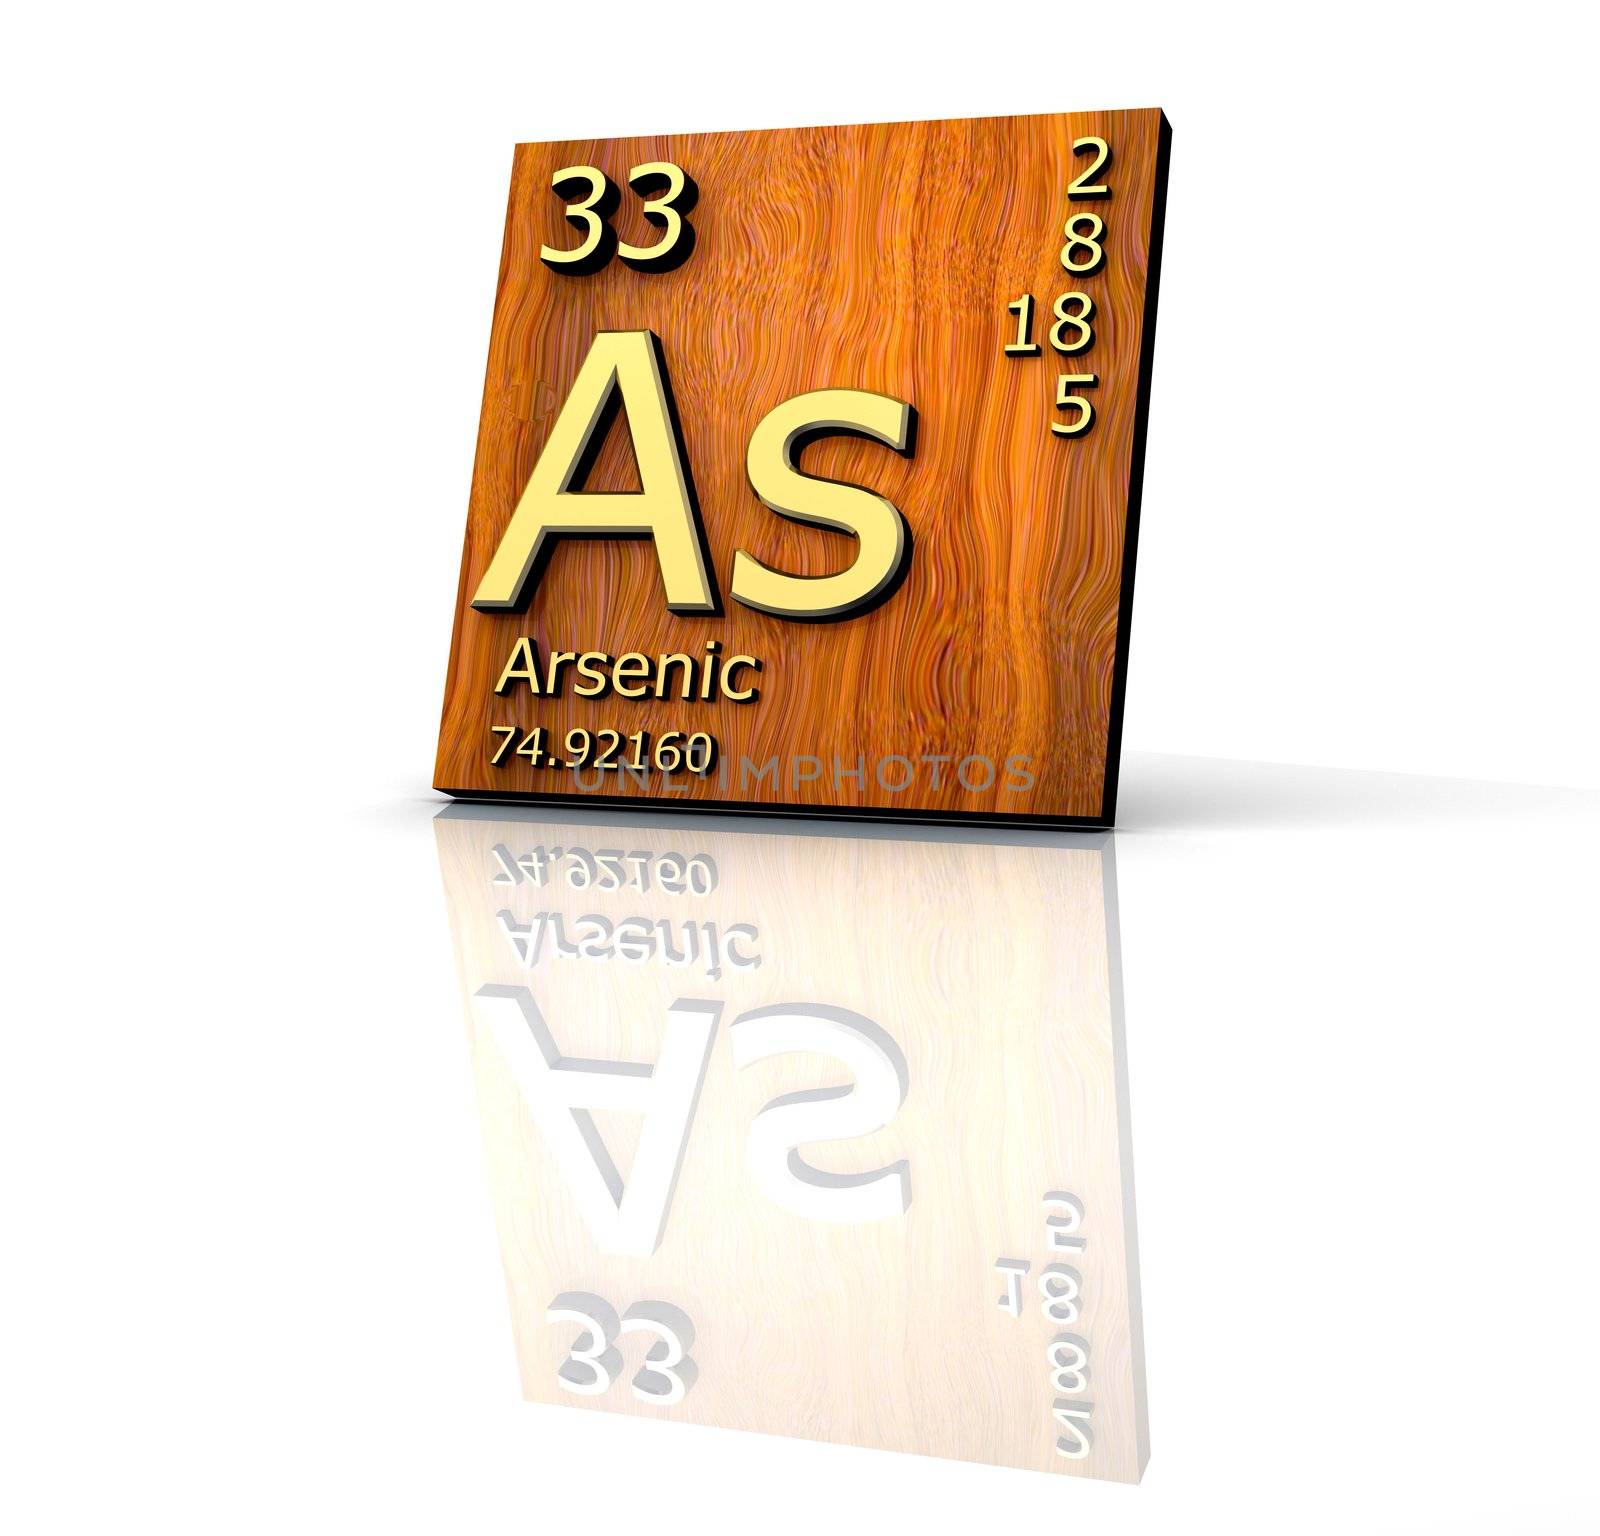 Arsenic form Periodic Table of Elements - wood board - 3d made